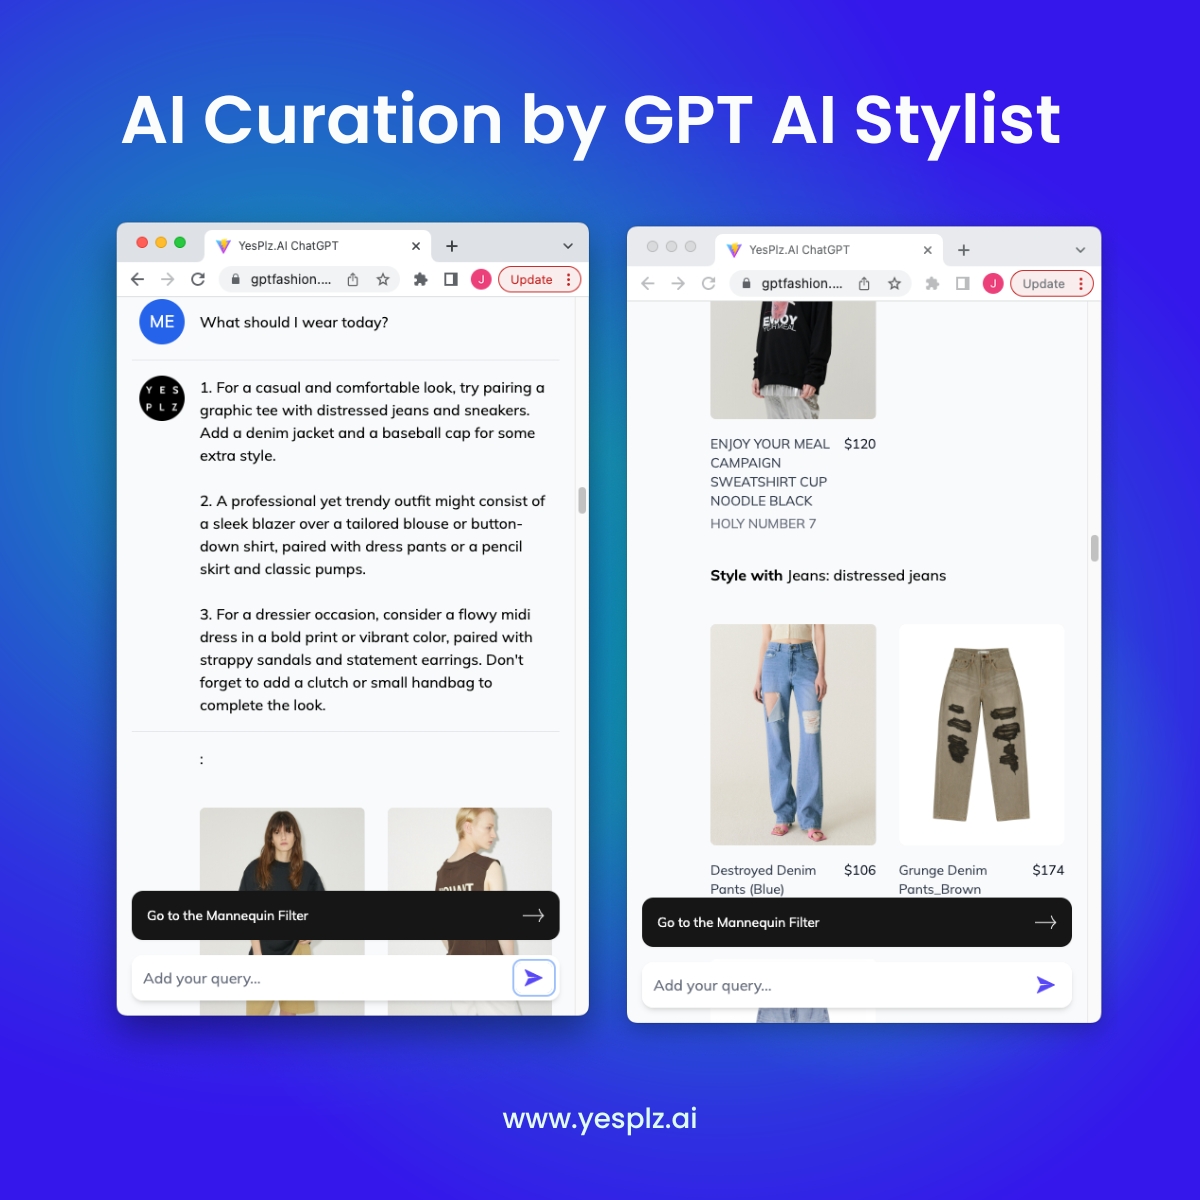 GPT AI Stylist curated products